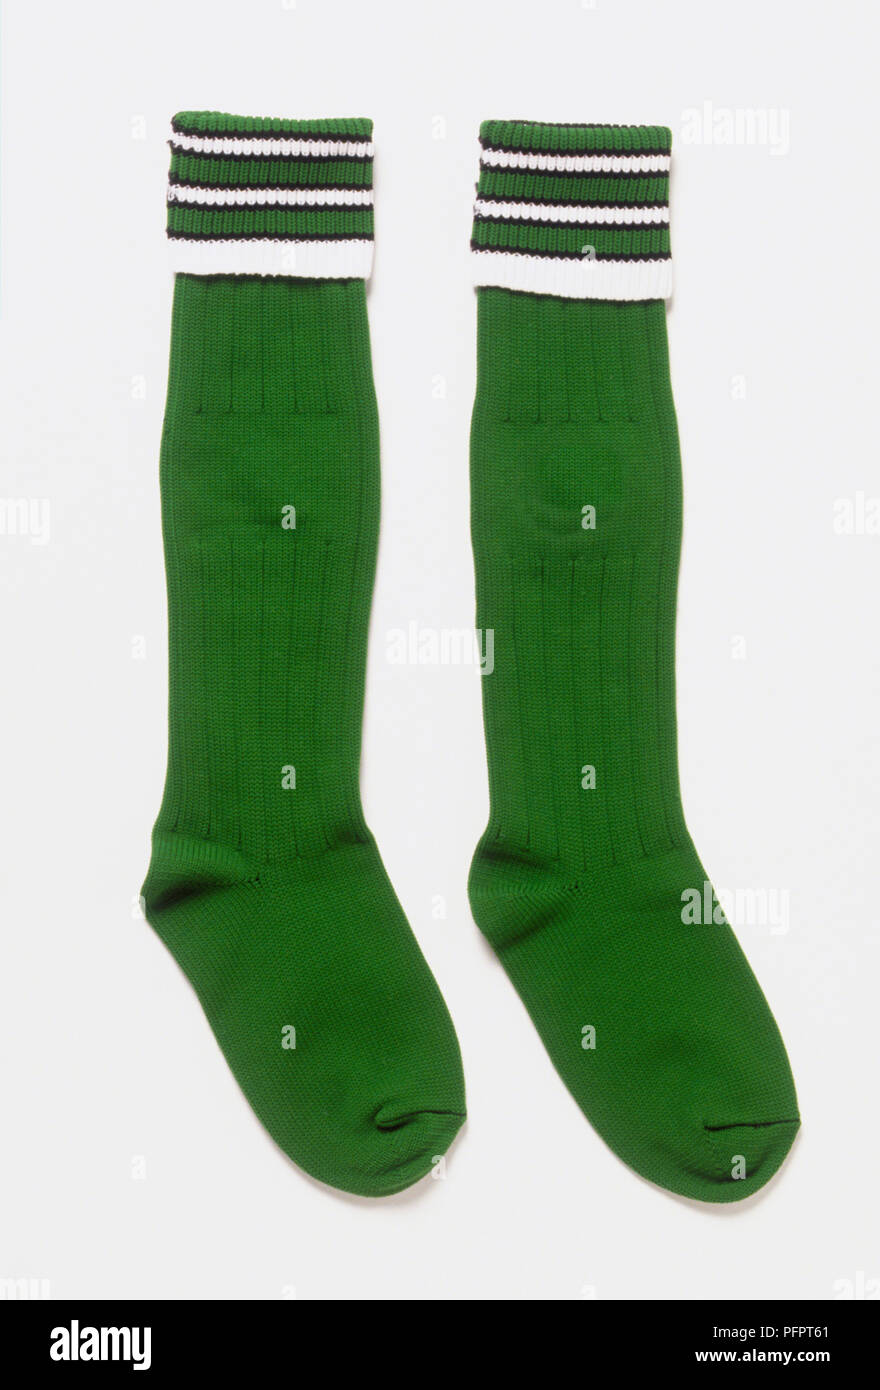 Pair of long, green and white striped socks Stock Photo